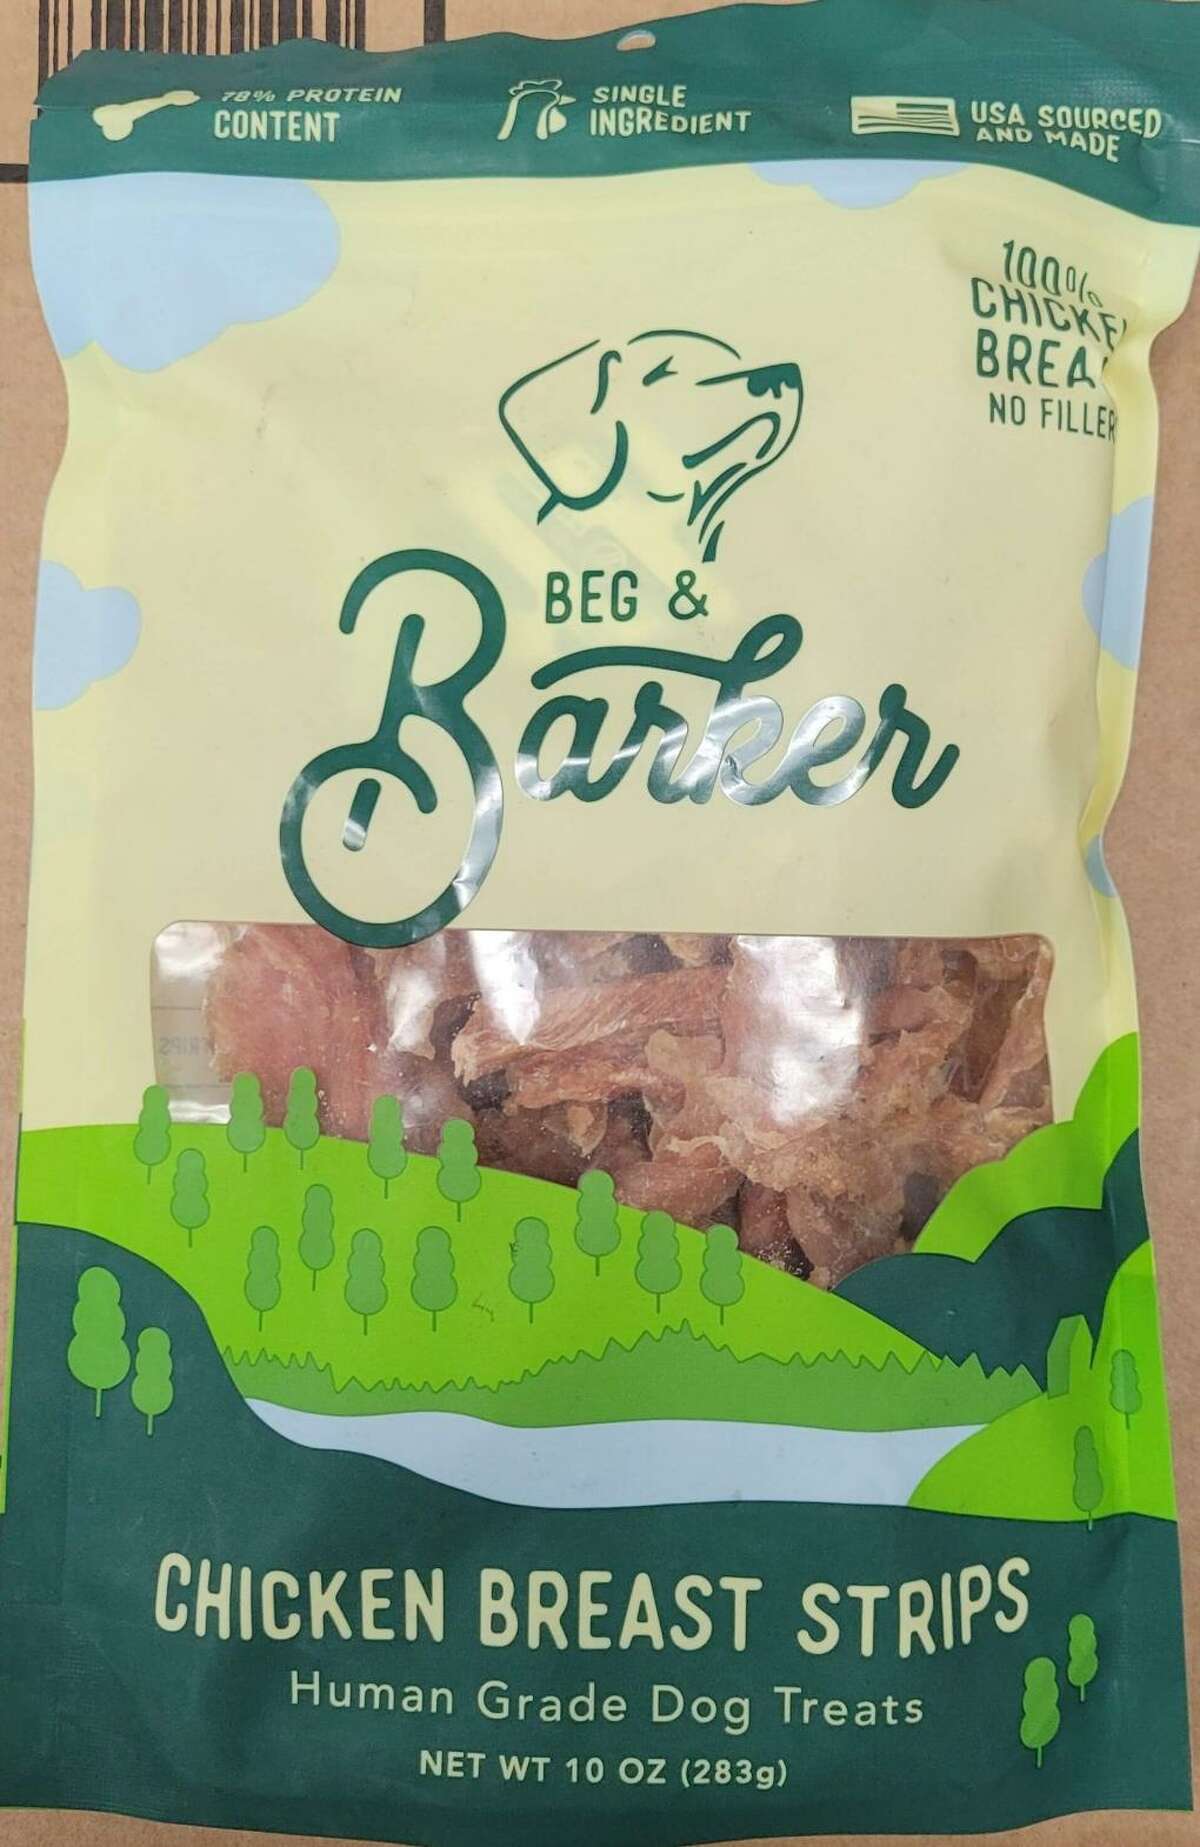 Stormberg Foods has recalled several chicken breast treats for dogs, including Bed & Barker brand. 